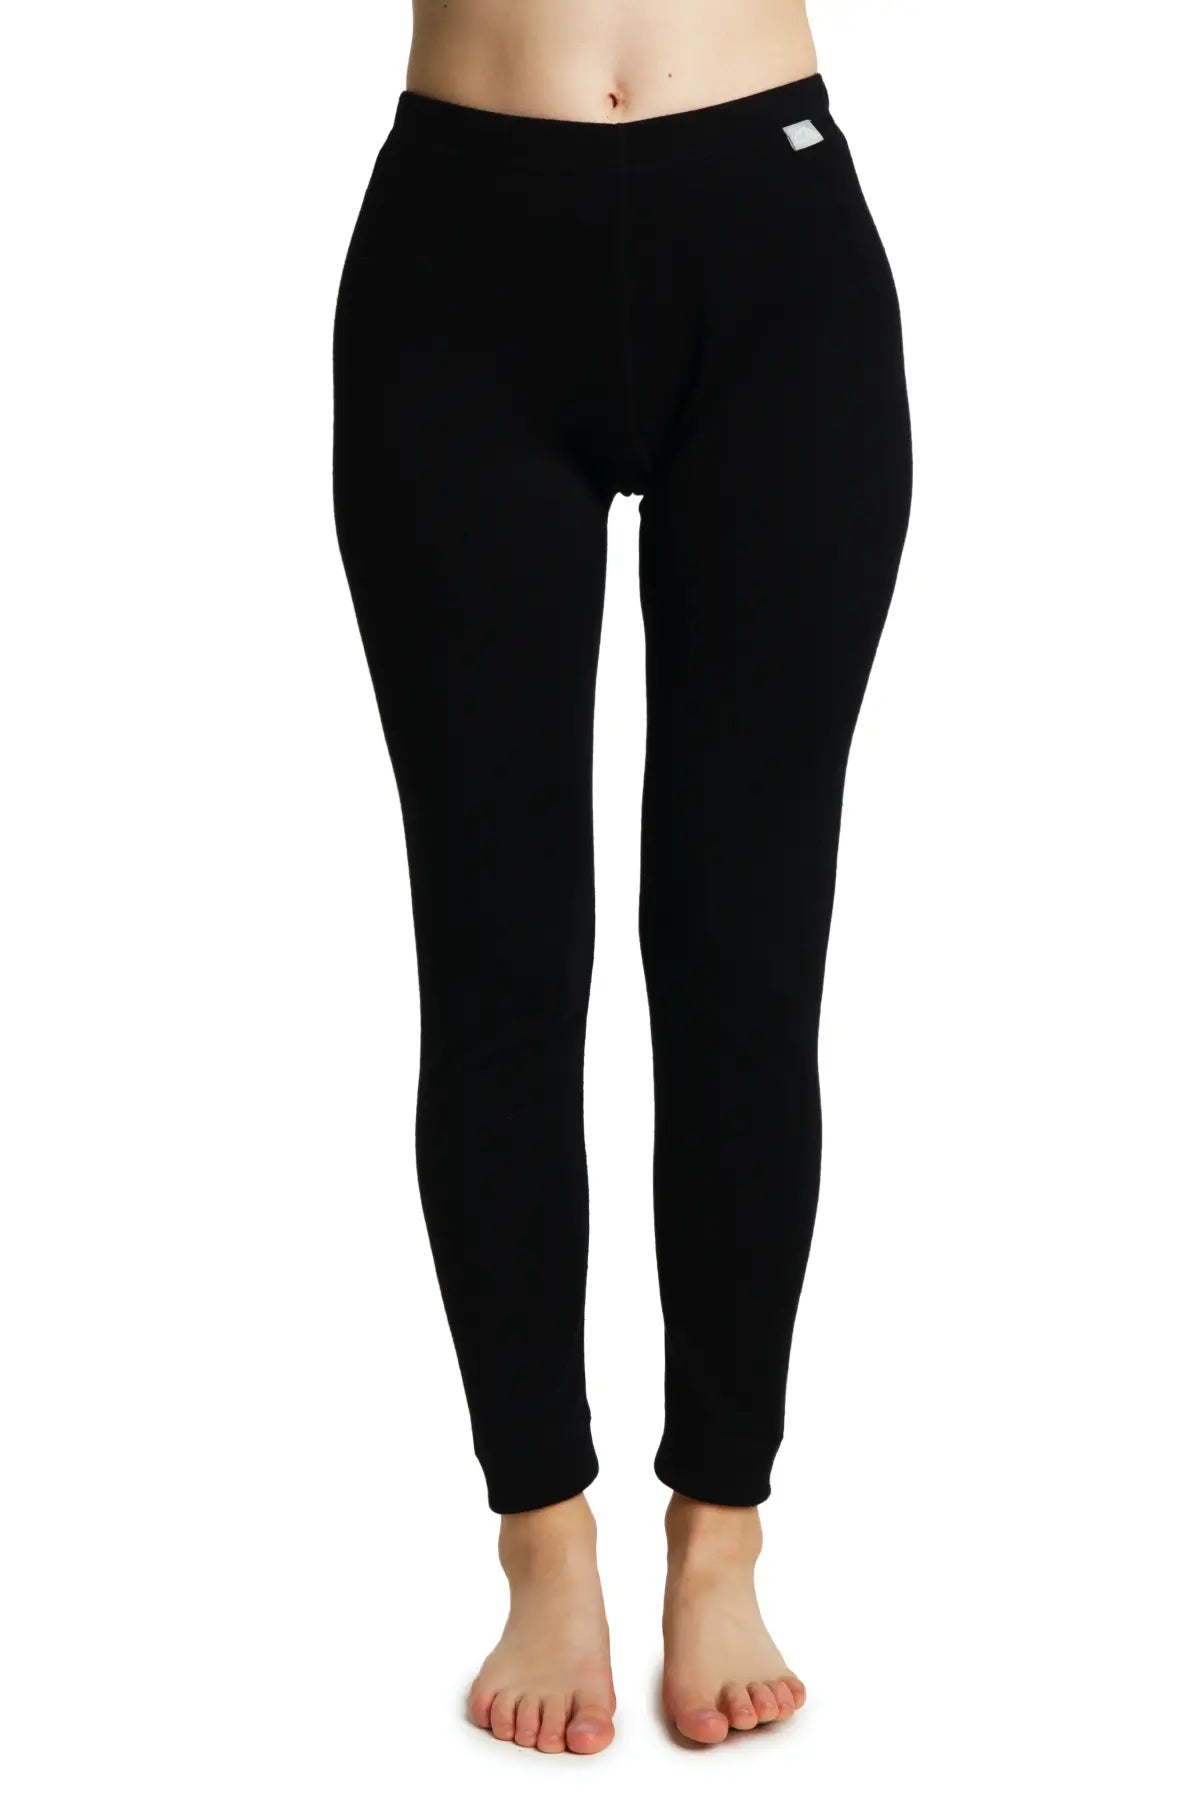 X-Small, New Black) - WoolX Avery - Women's Wool Leggings - Midweight  Merino Base Layer Bottoms - Warm & Soft: Buy Online at Best Price in UAE 